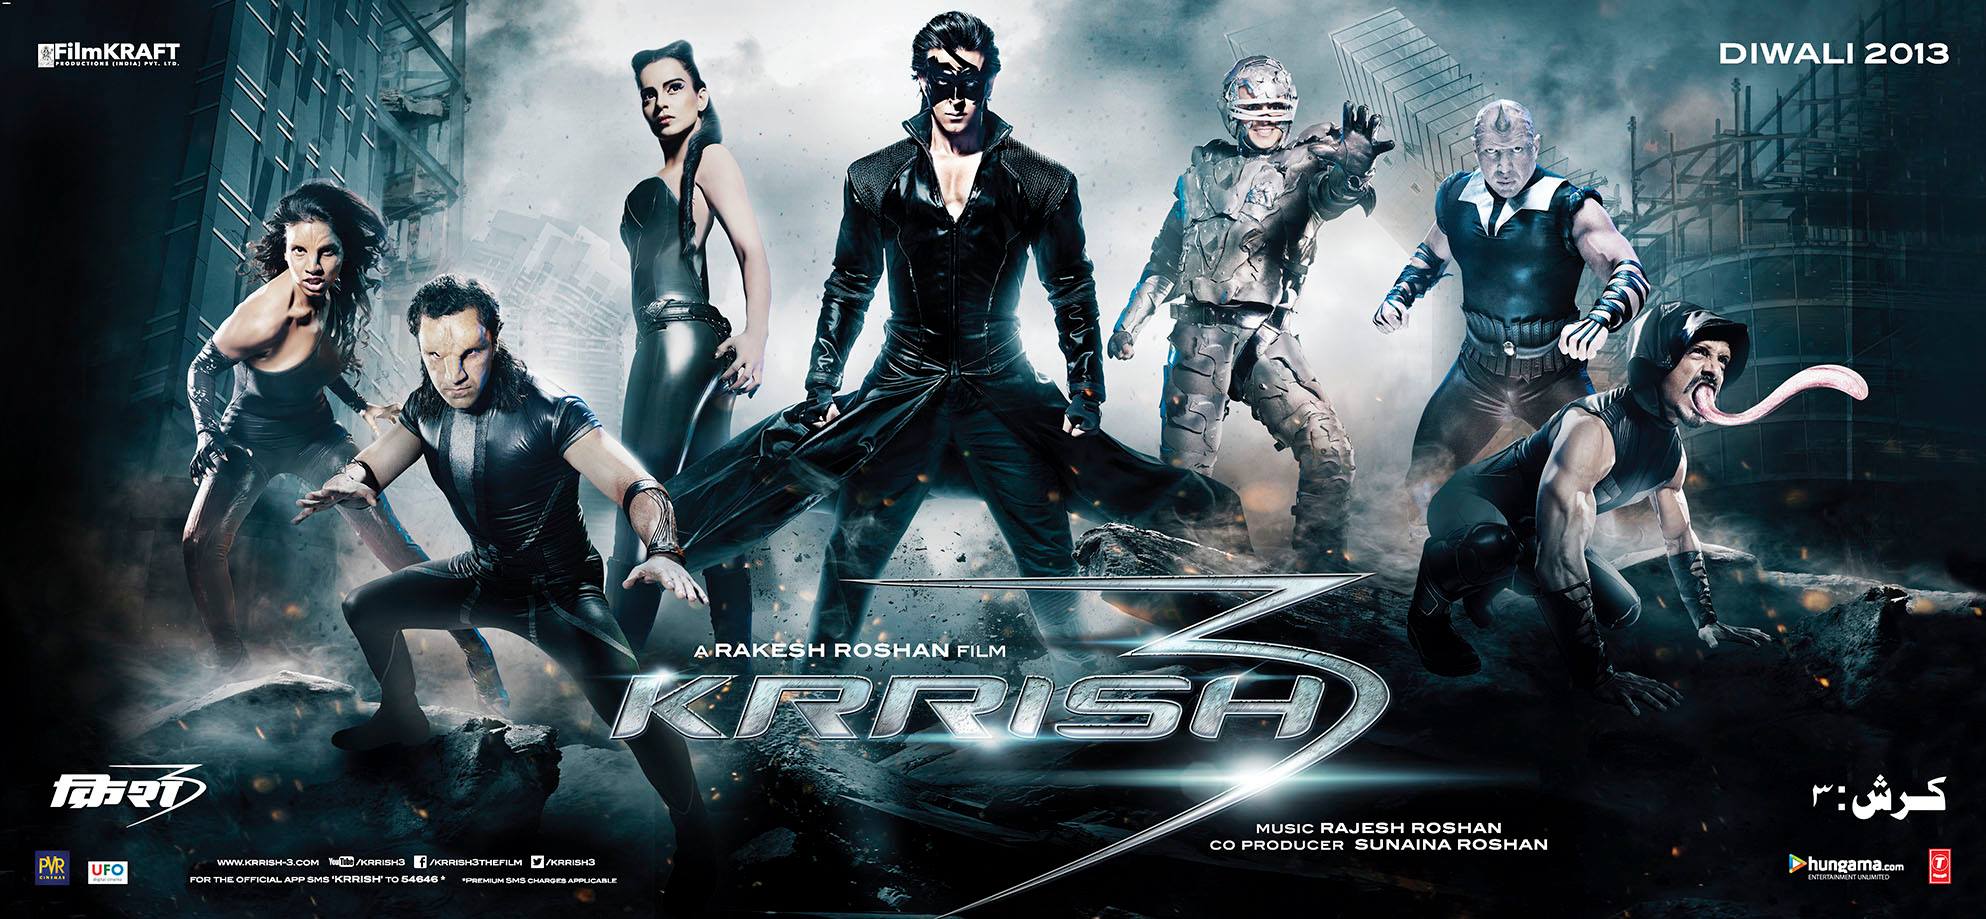 Krrish 3' poster is copied from 'Avengers' Copy everything is original in Bollywood